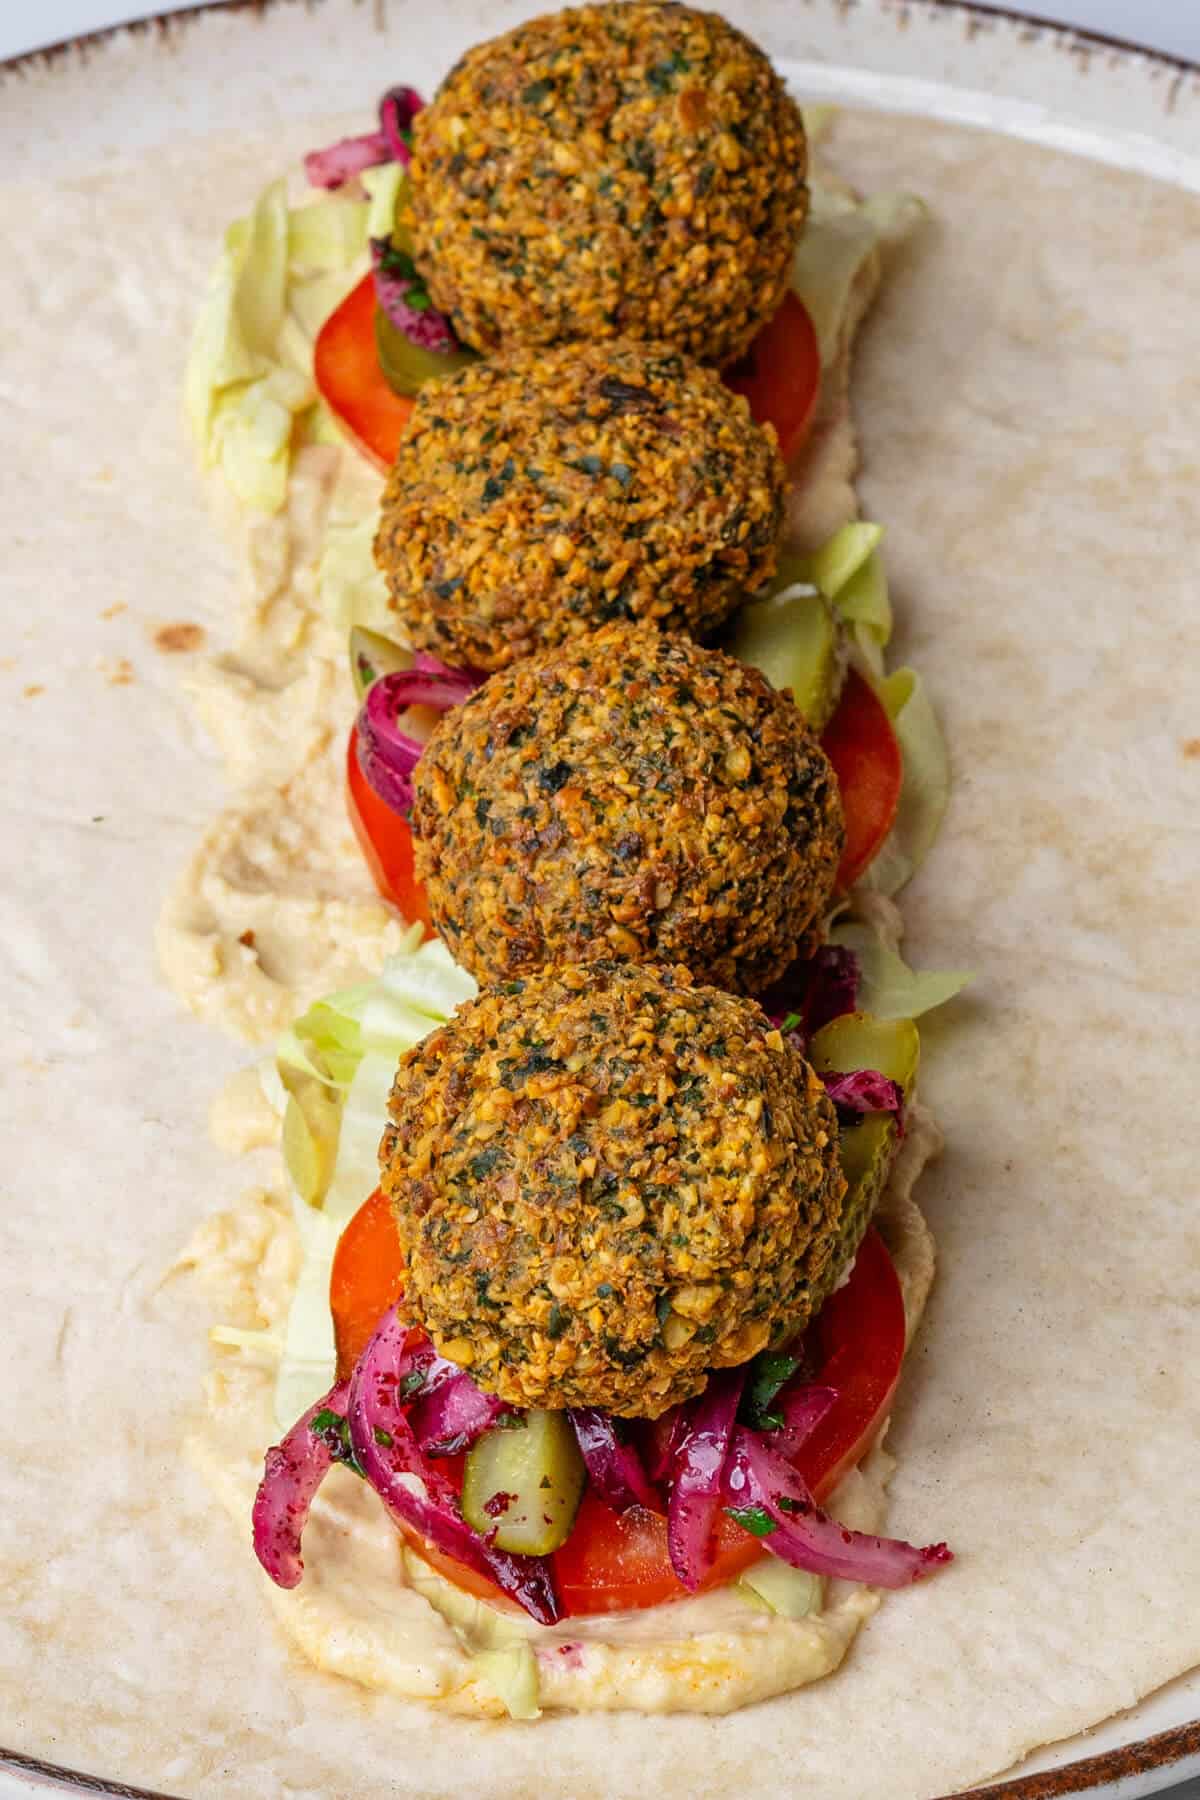 Falafel balls placed on top of filling and wrap